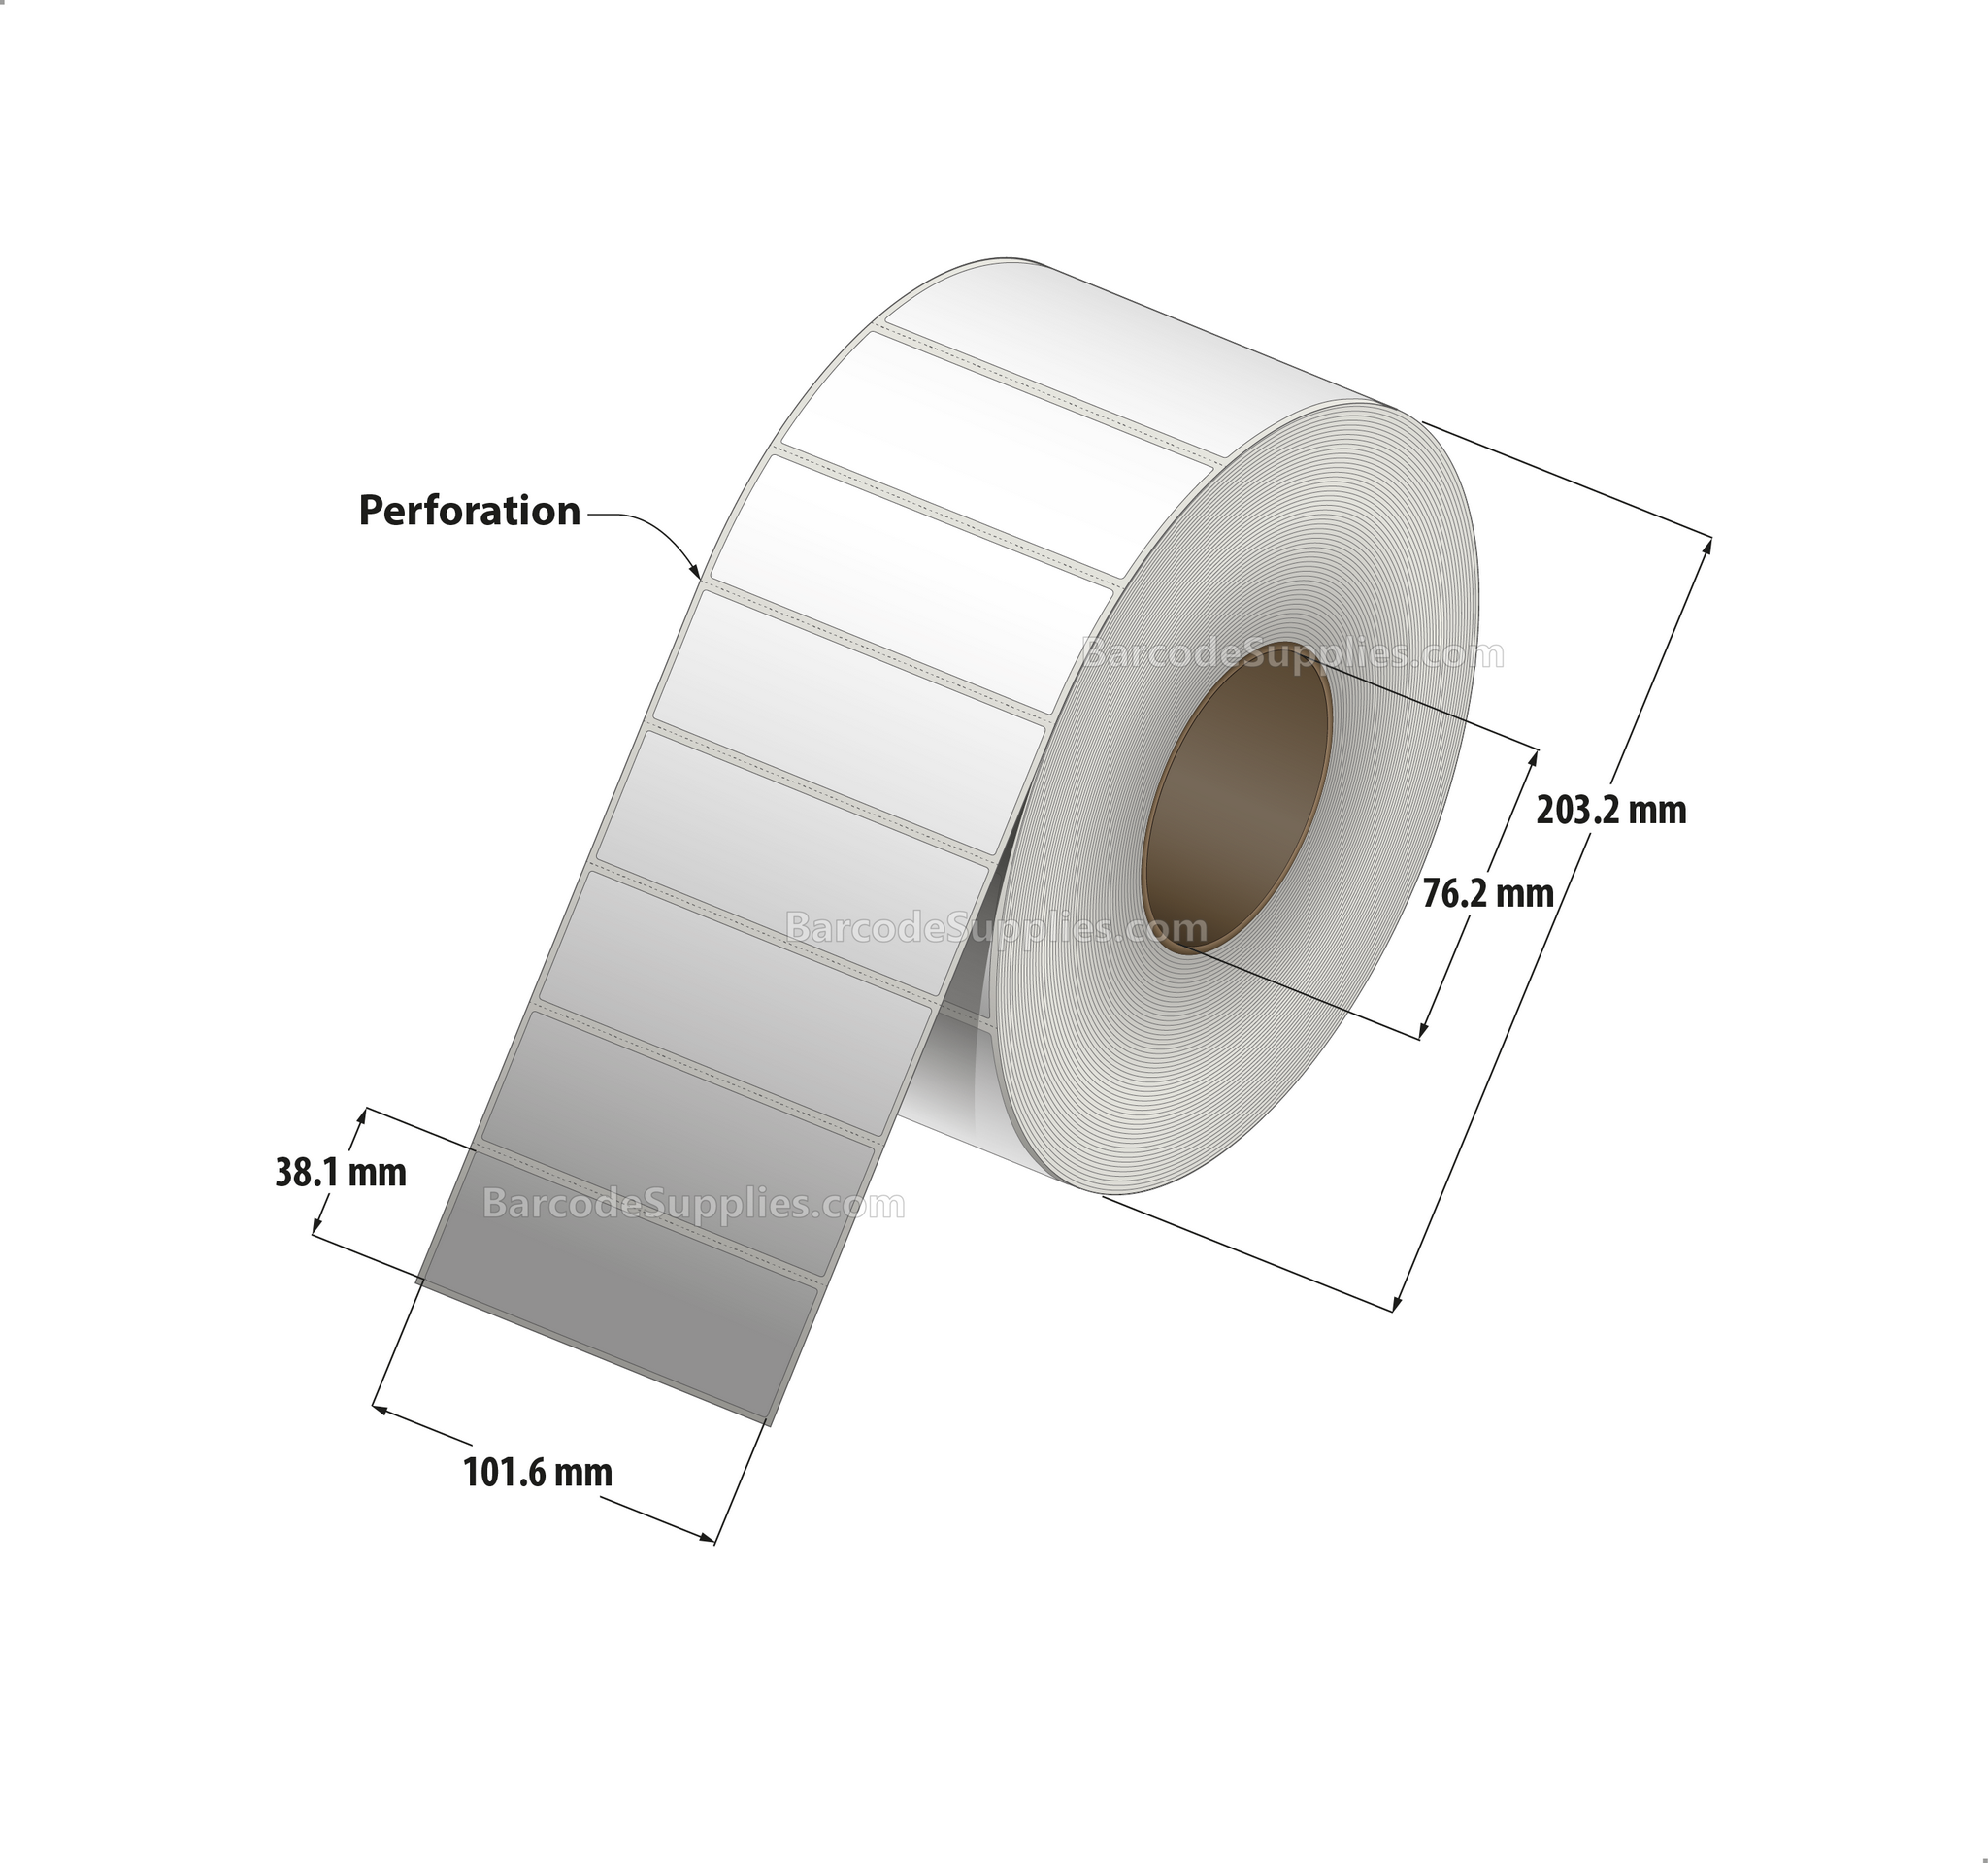 4 x 1.5 Thermal Transfer White Labels With Permanent Adhesive - Perforated - 3600 Labels Per Roll - Carton Of 4 Rolls - 14400 Labels Total - MPN: RT-4-15-3600-3